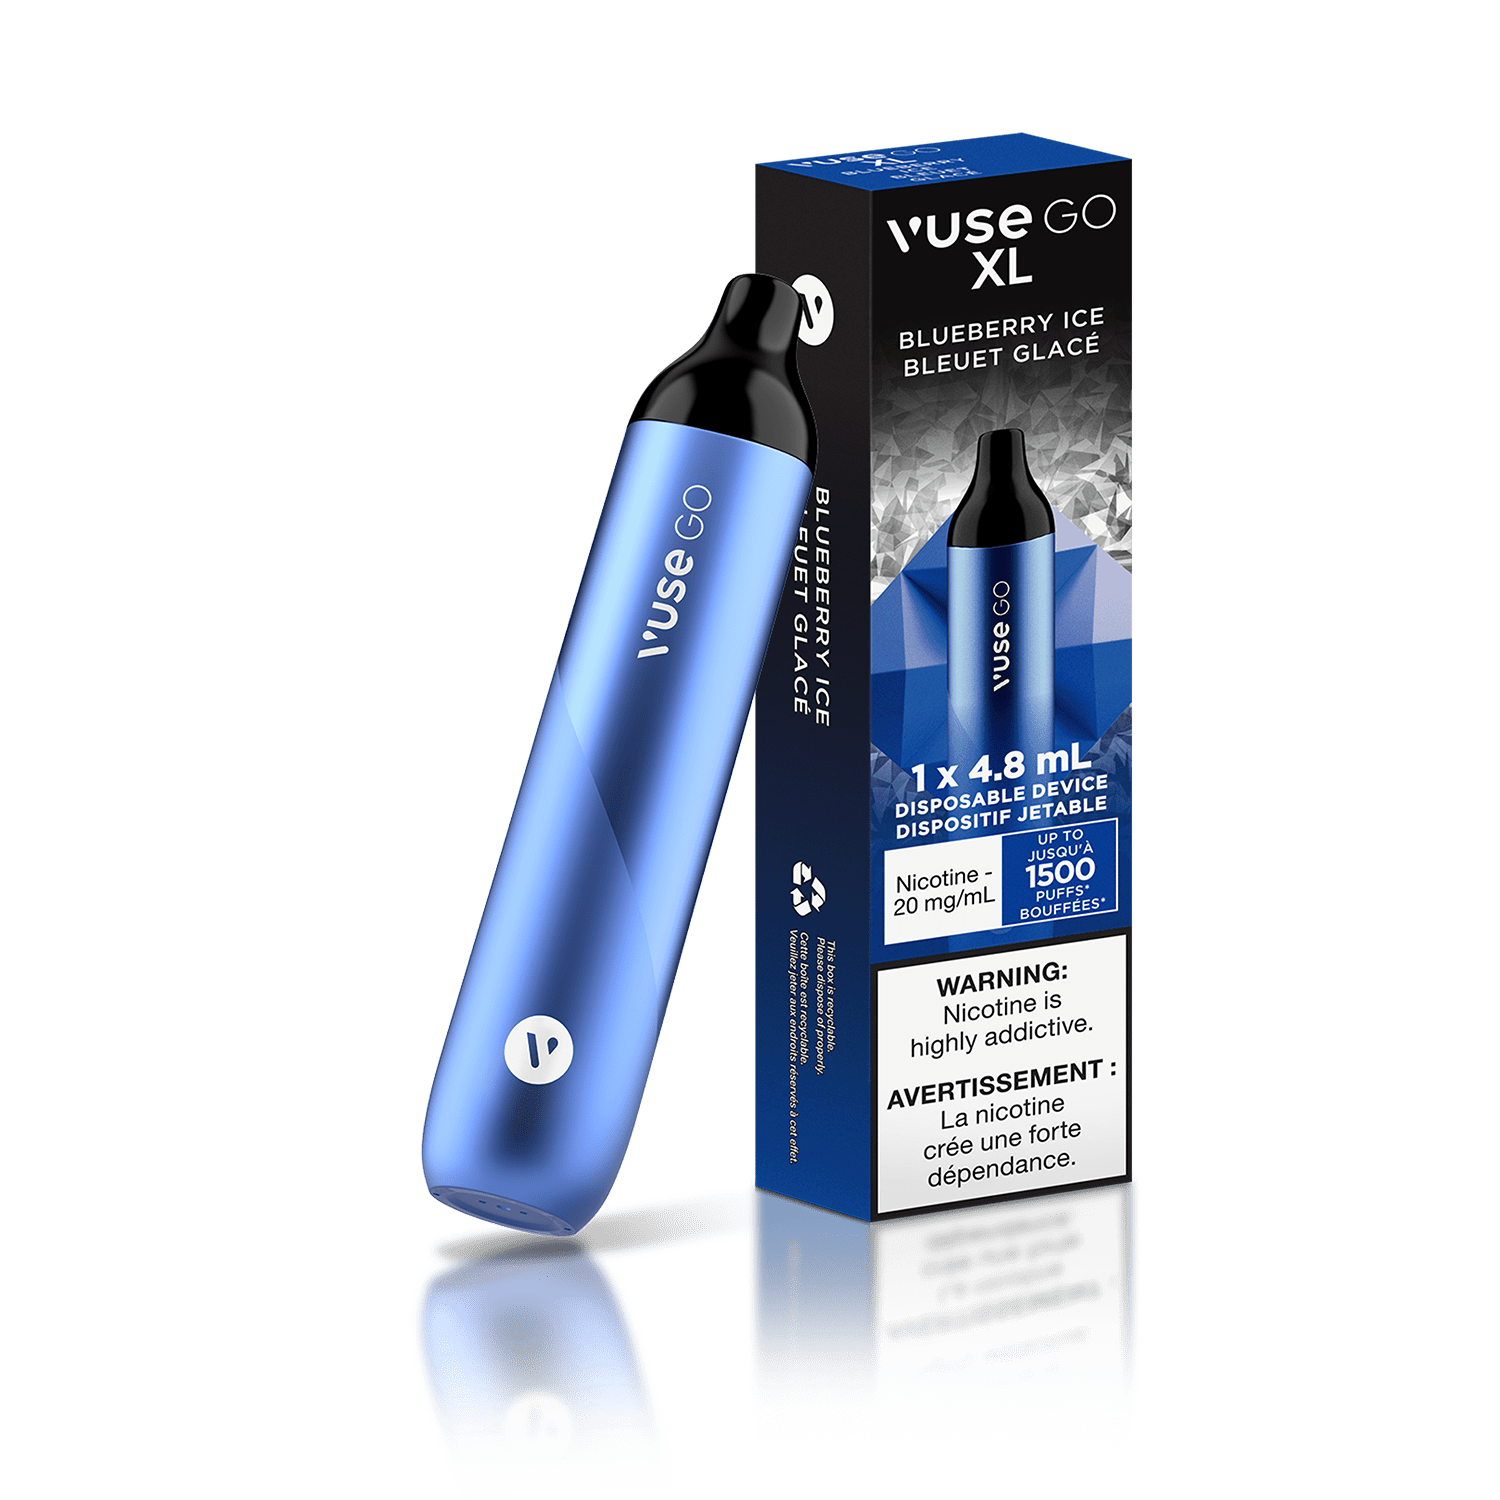 Vuse GO XL Disposable Vape - Blueberry Ice available on Canada online vape shop